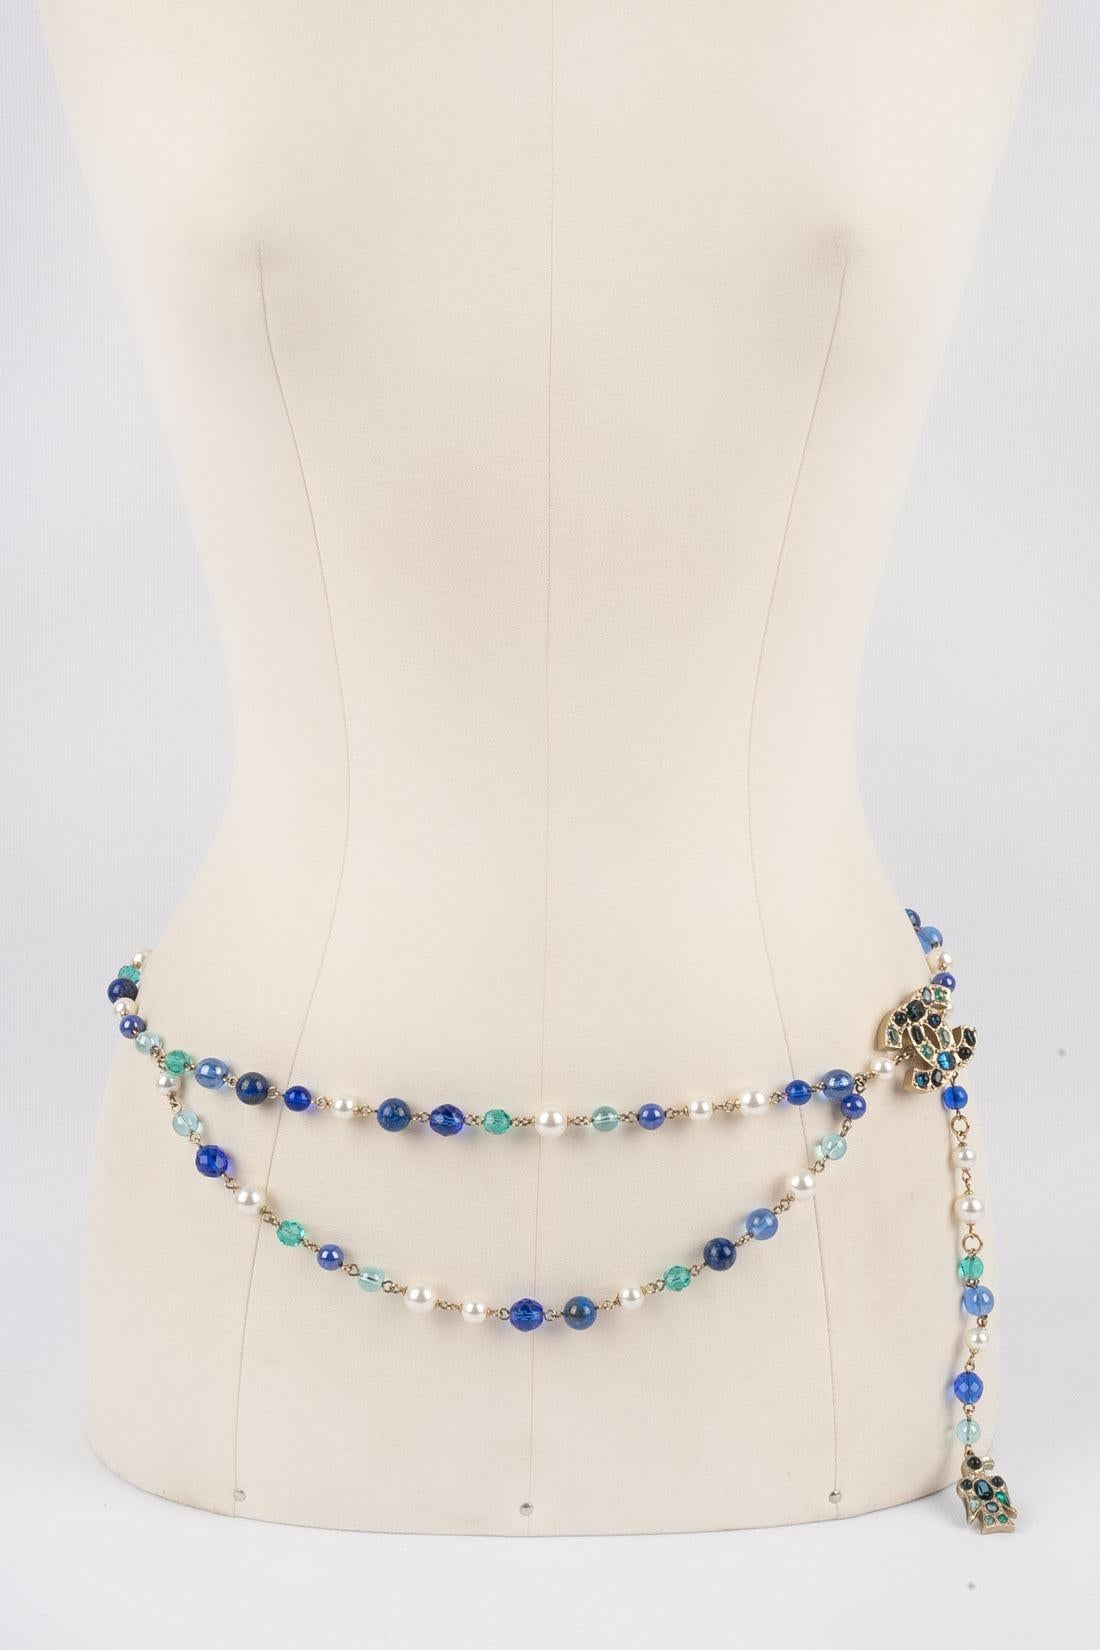 Chanel - (Made in France) Ligh-golden metal belt composed of costume pearls and blue-tone glass pearls. 2007 Fall-Winter Collection.

Additional information:
Condition: Very good condition
Dimensions: Length: 90 cm
Period: 21st Century

Seller